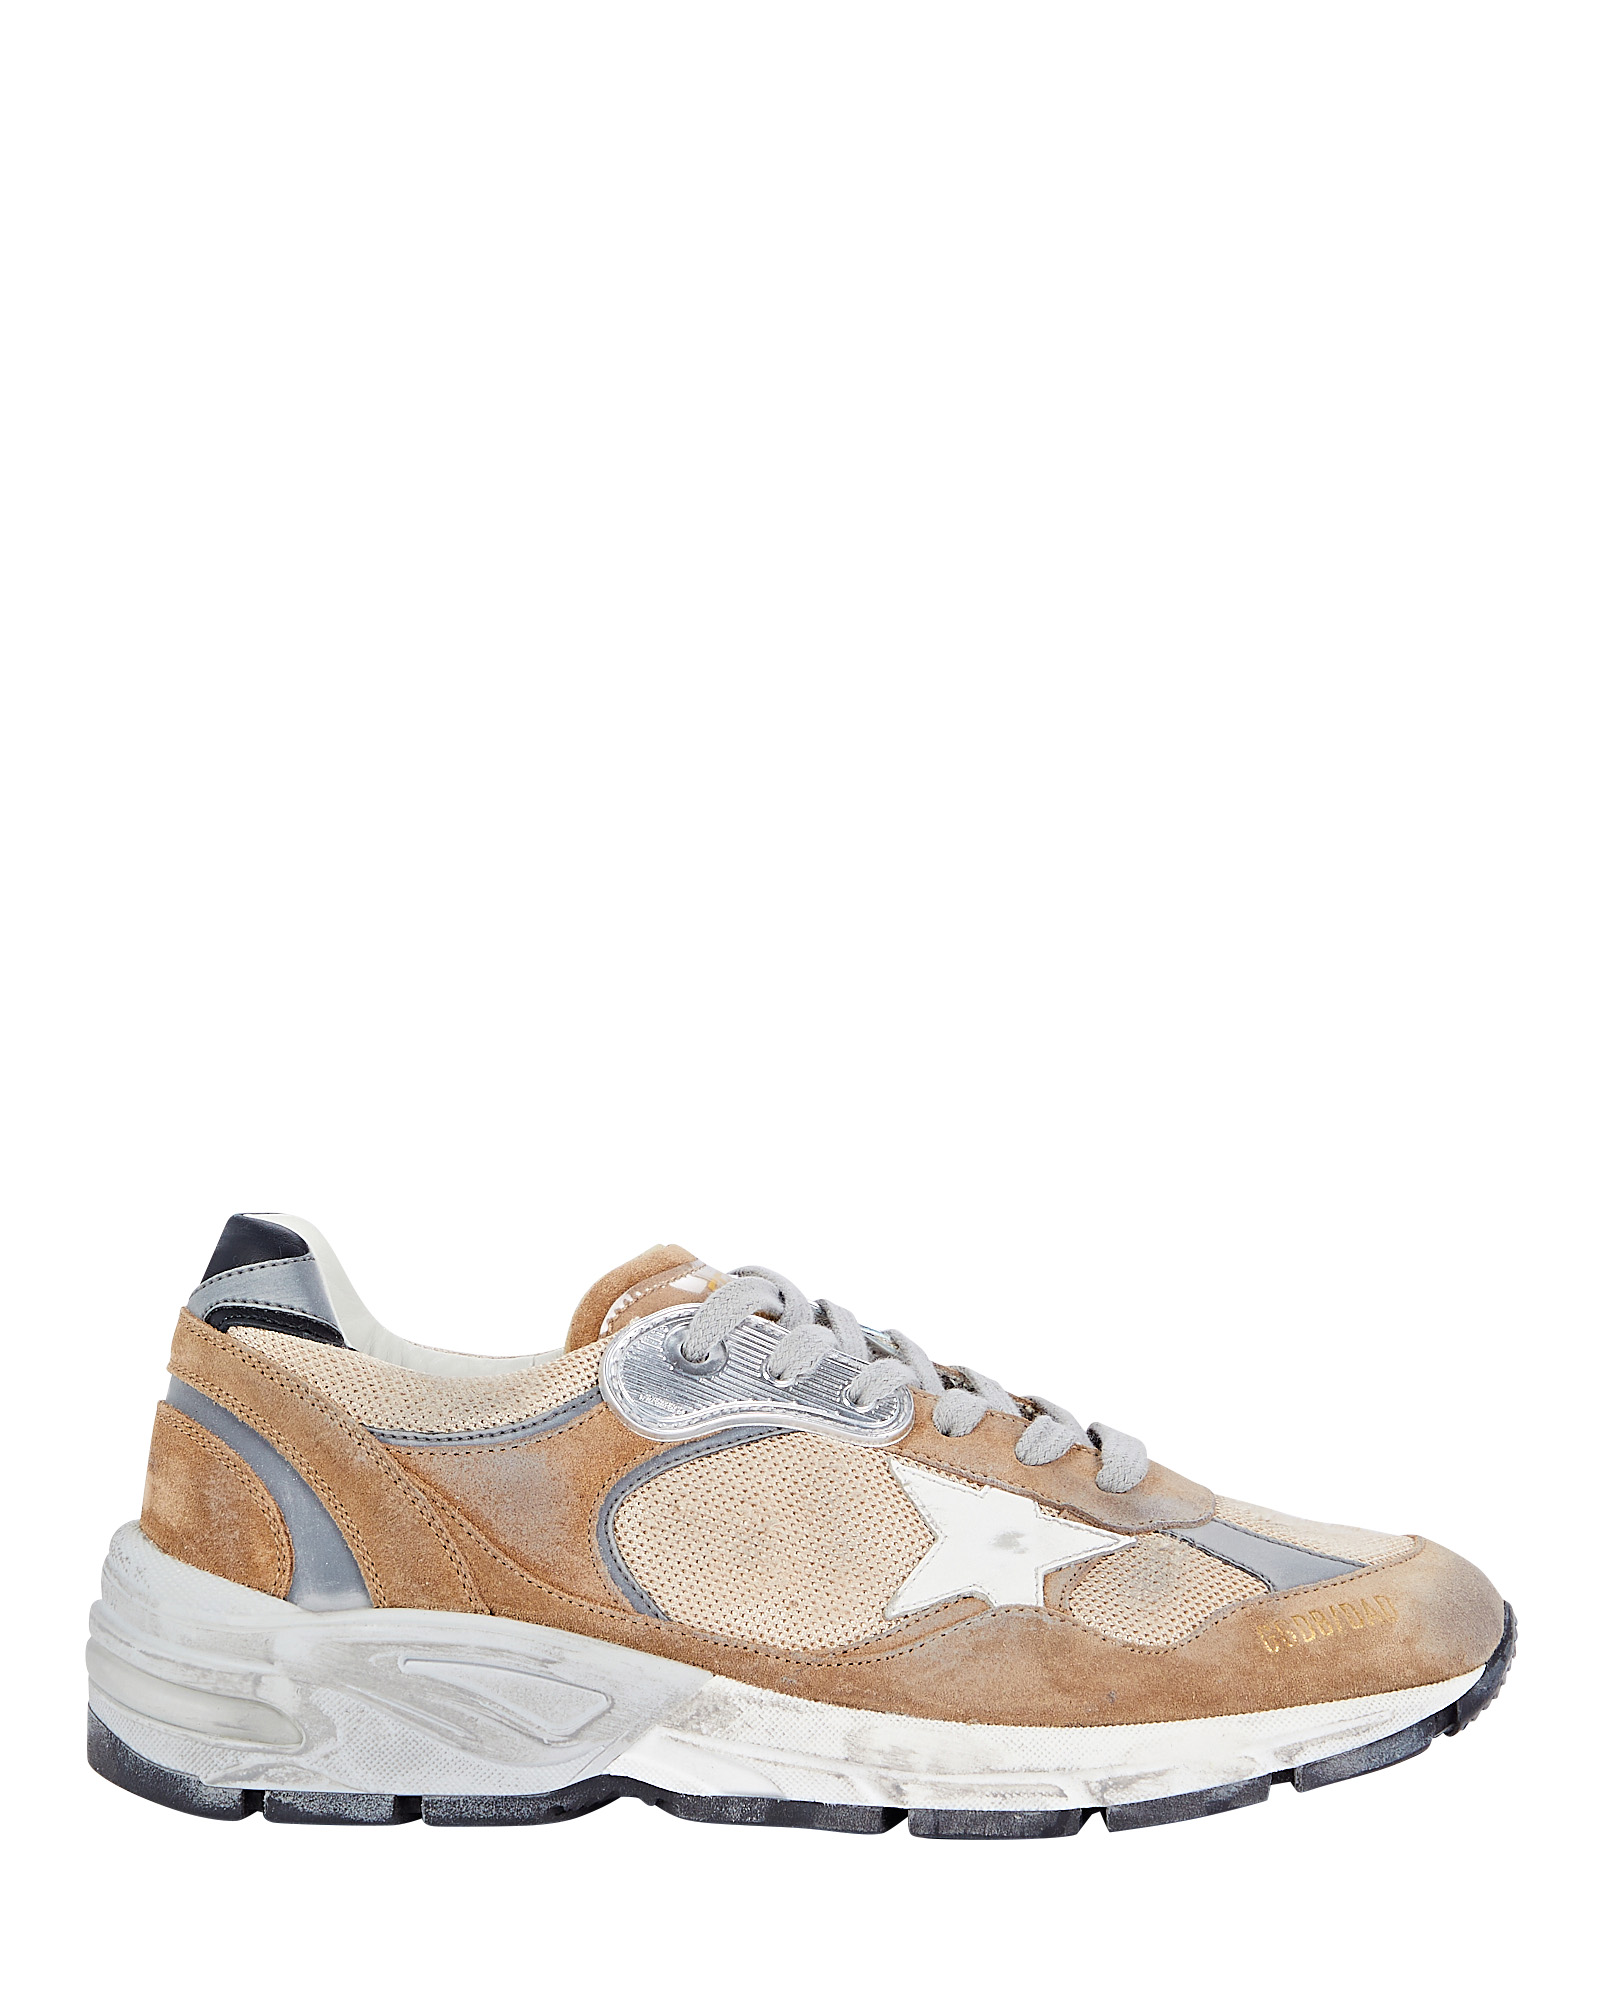 Golden Goose Dad Leather Low-Top Sneakers in Brown | INTERMIX®